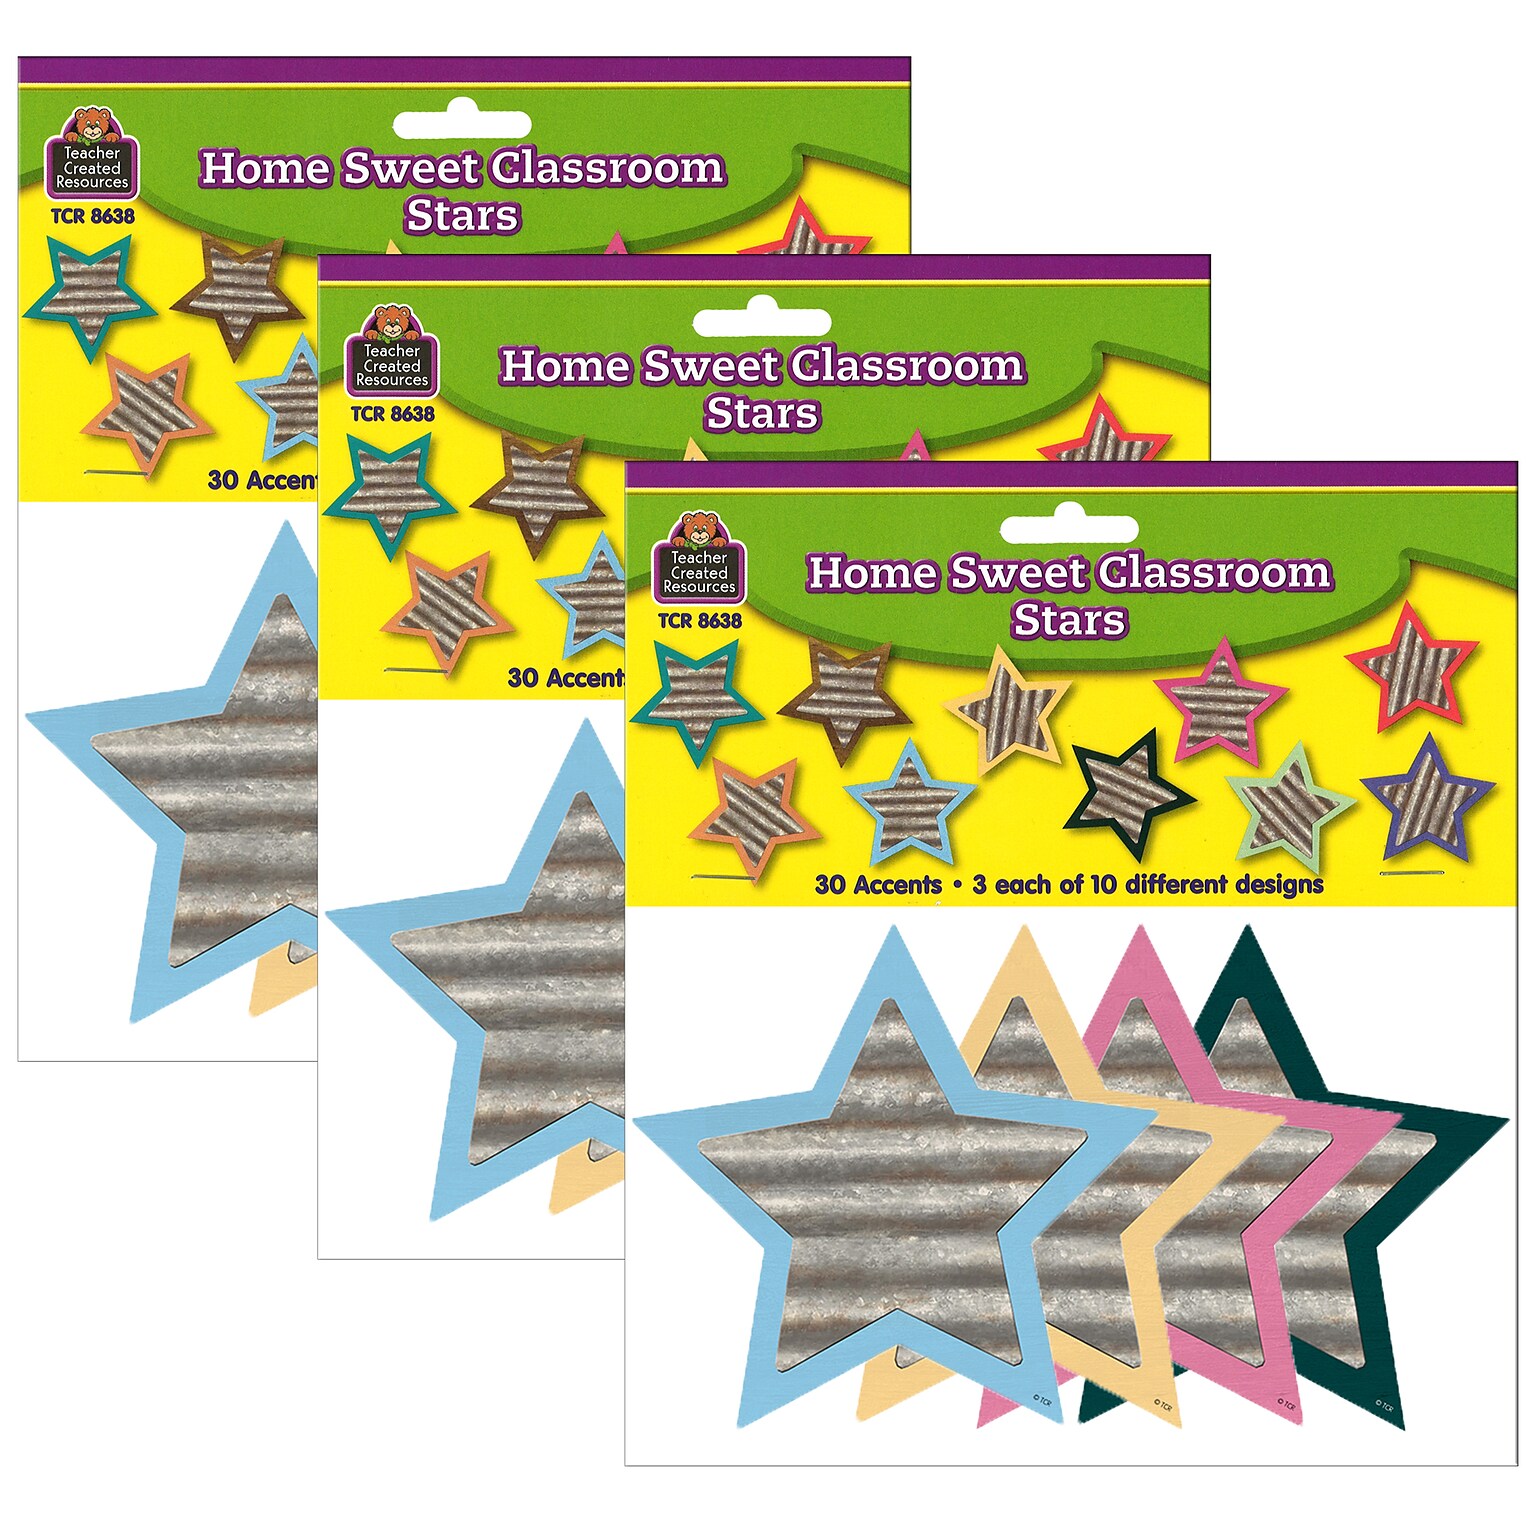 Teacher Created Resources Home Sweet Classroom Stars Accents, 30 Per Pack, 3 Packs (TCR8638-3)